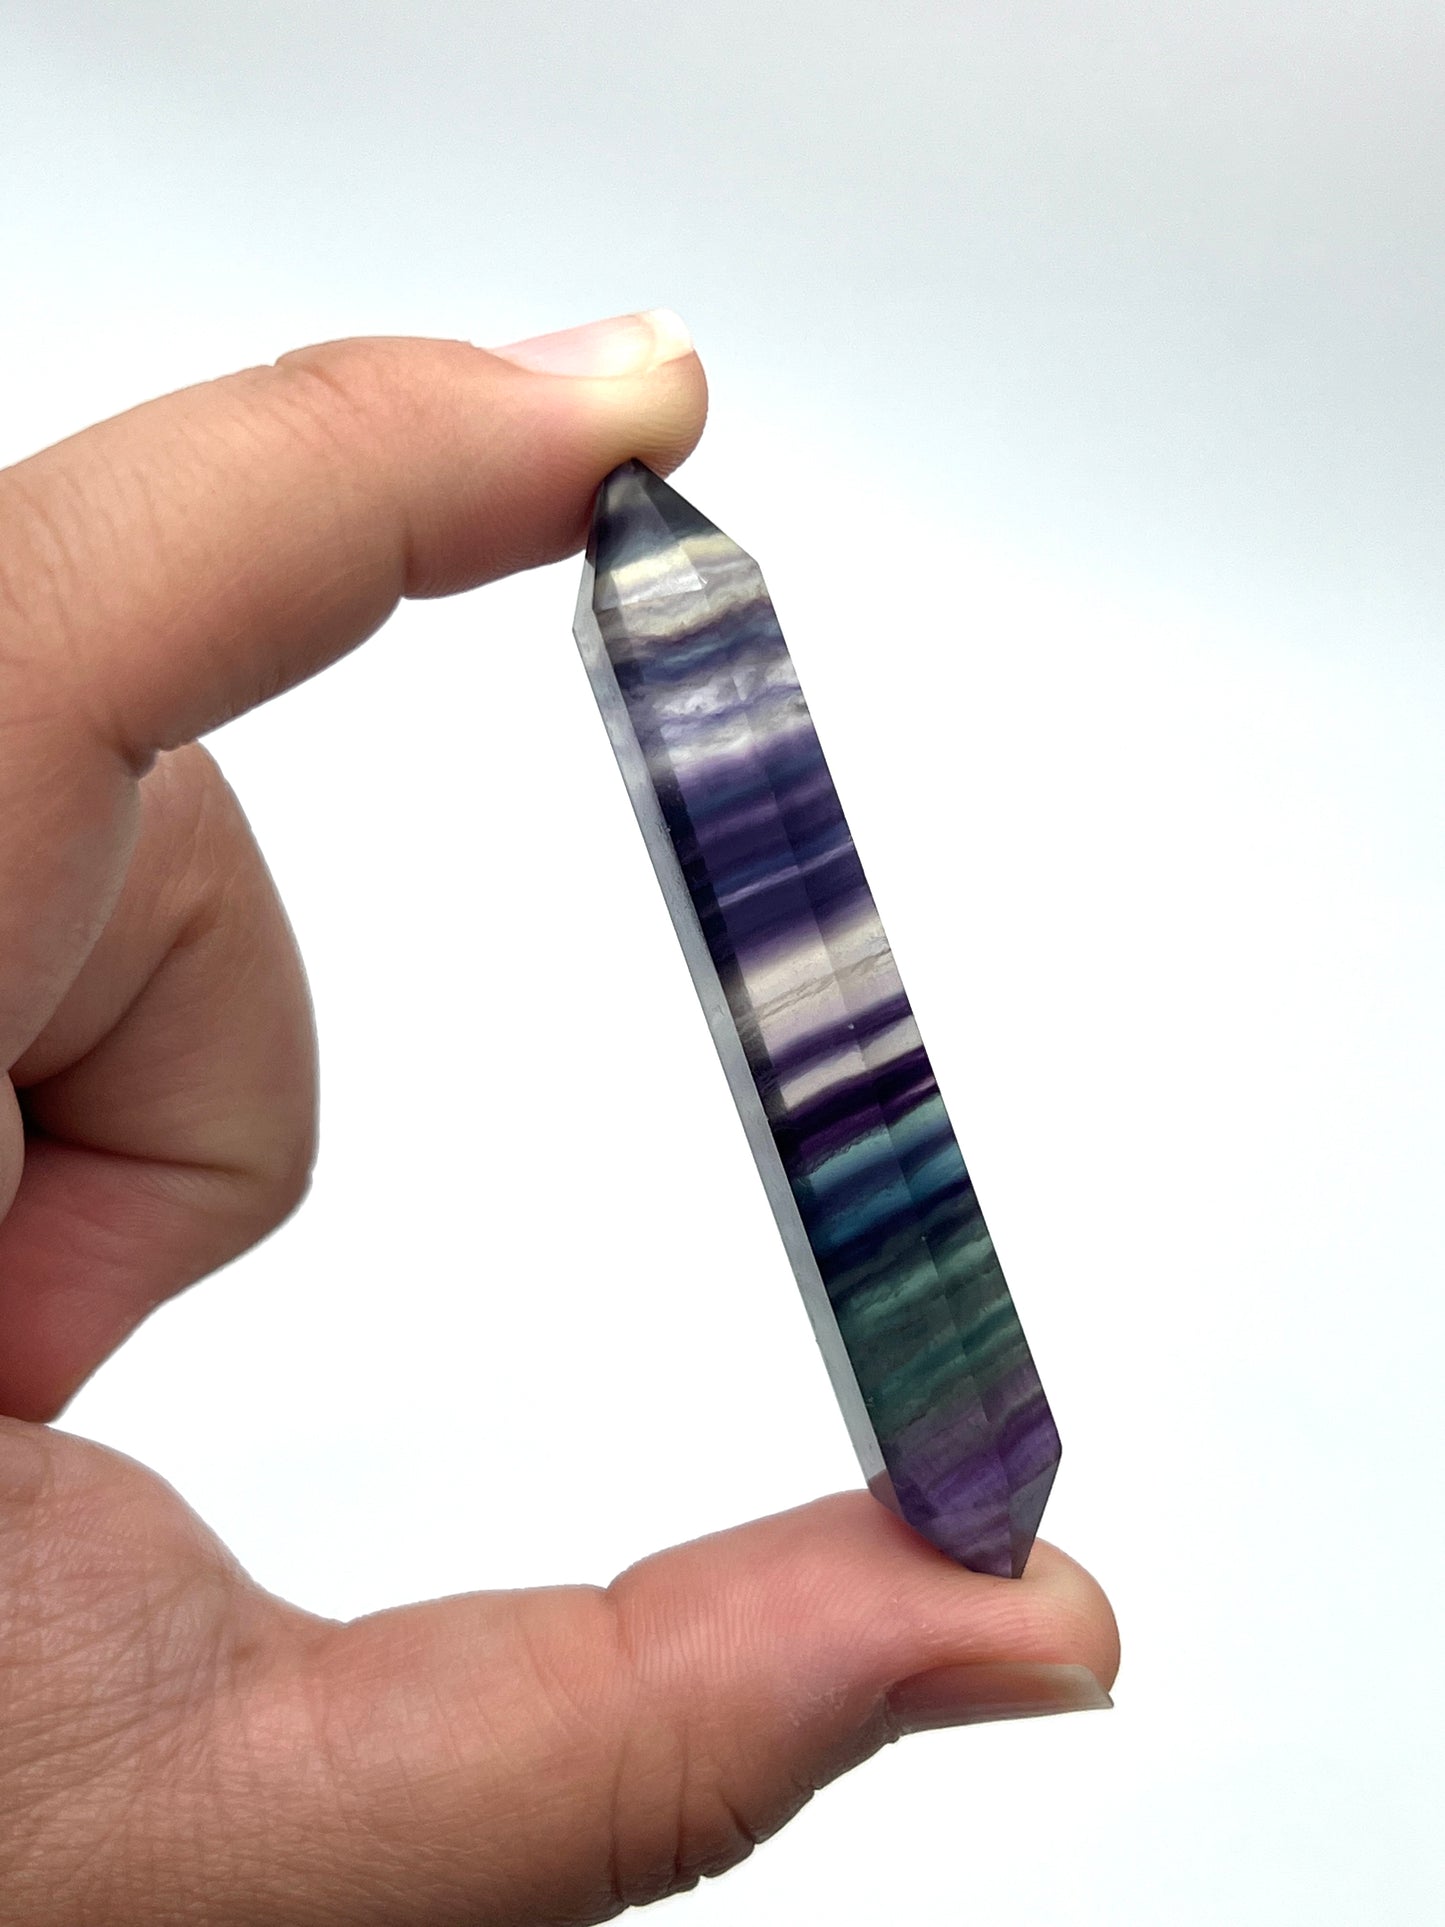 Double Terminated Fluorite Points